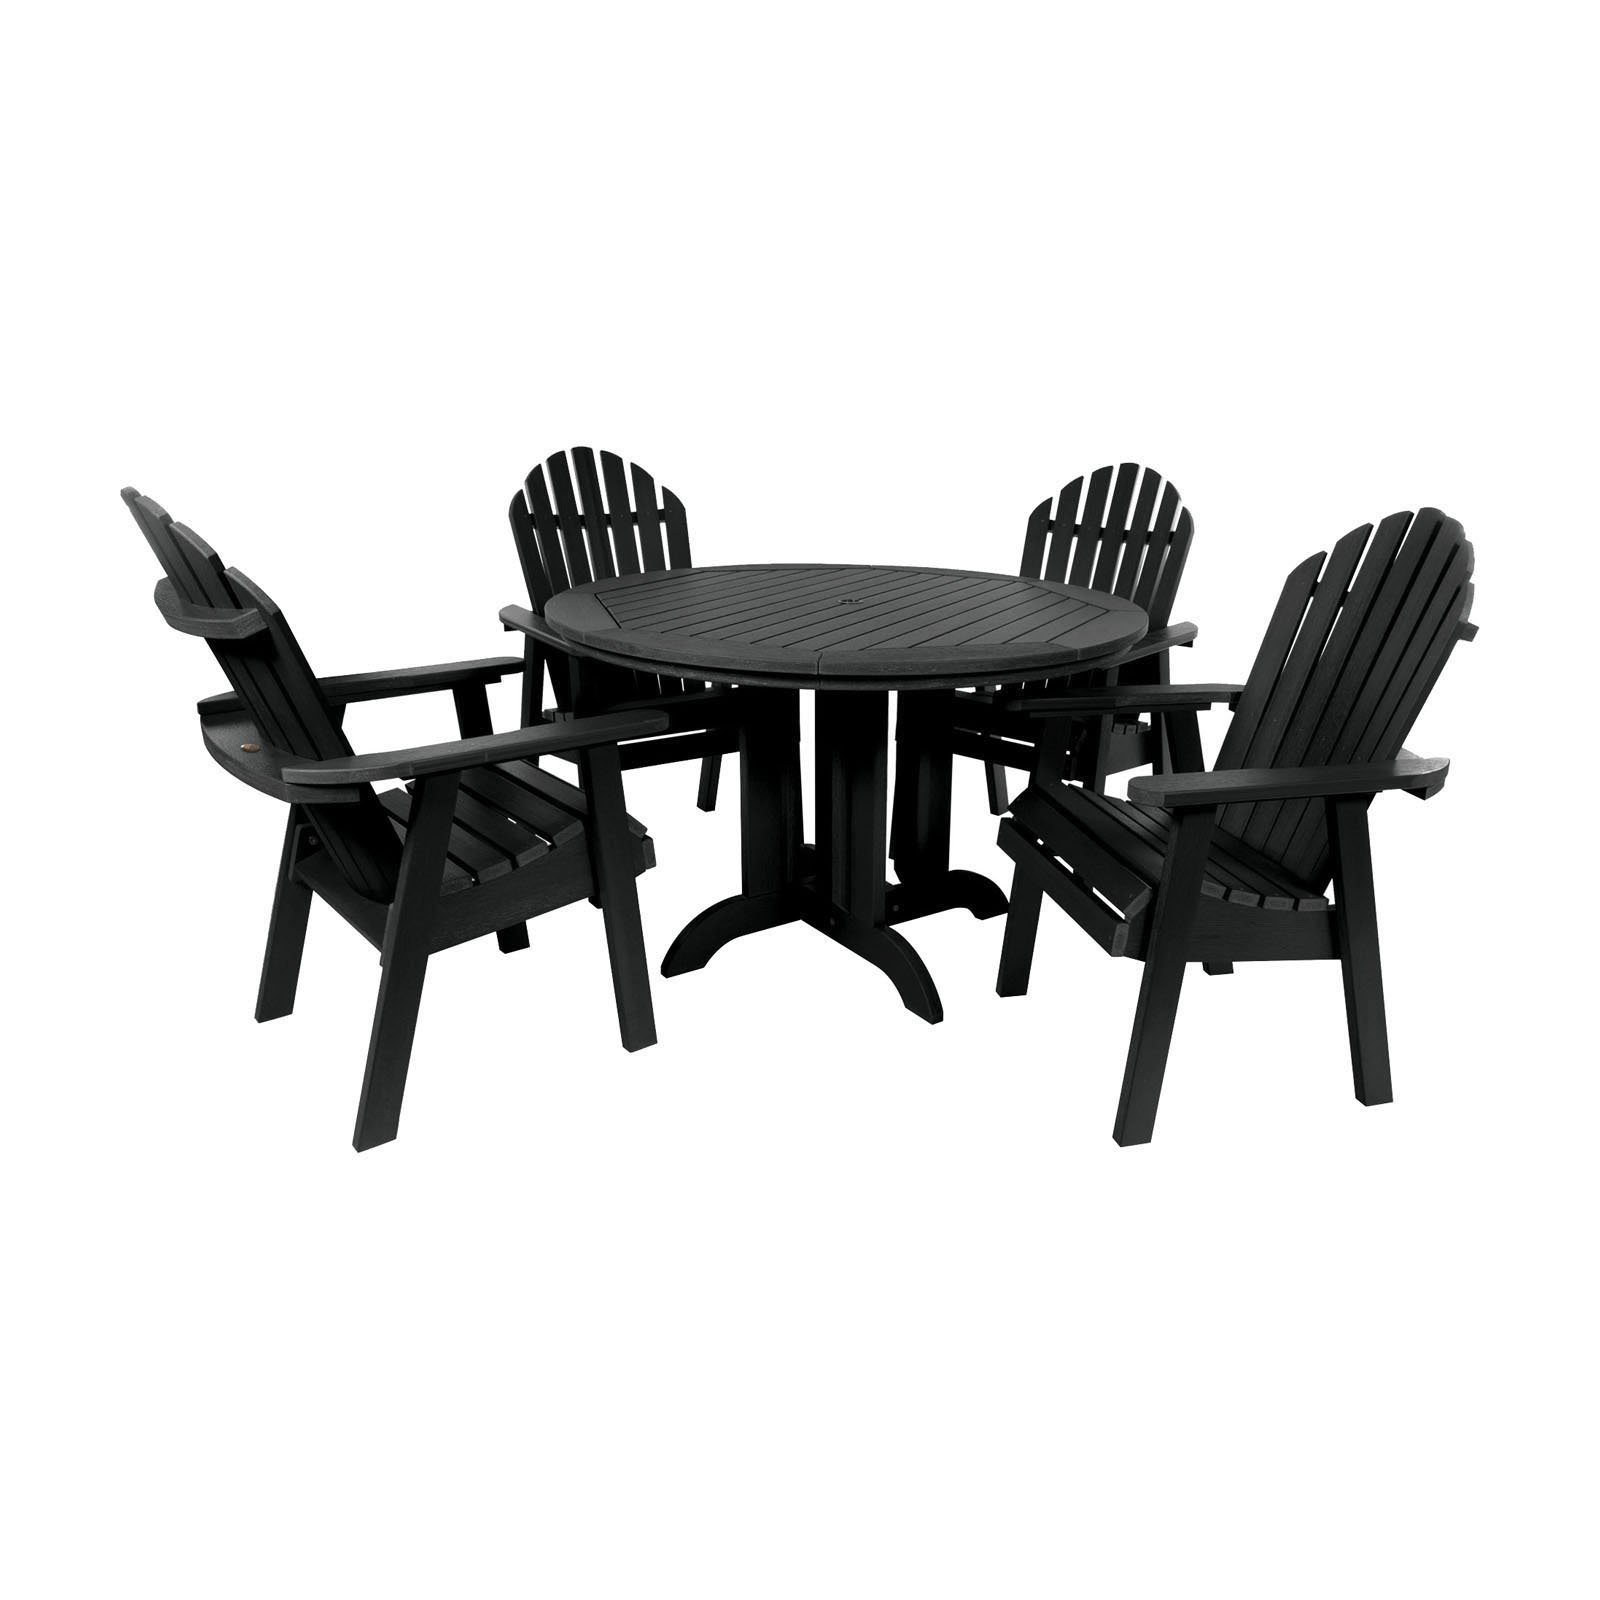 The Sequoia Professional Commercial Grade 5 Pc Muskoka Adirondack Dining Set with 48” Table - image 1 of 2